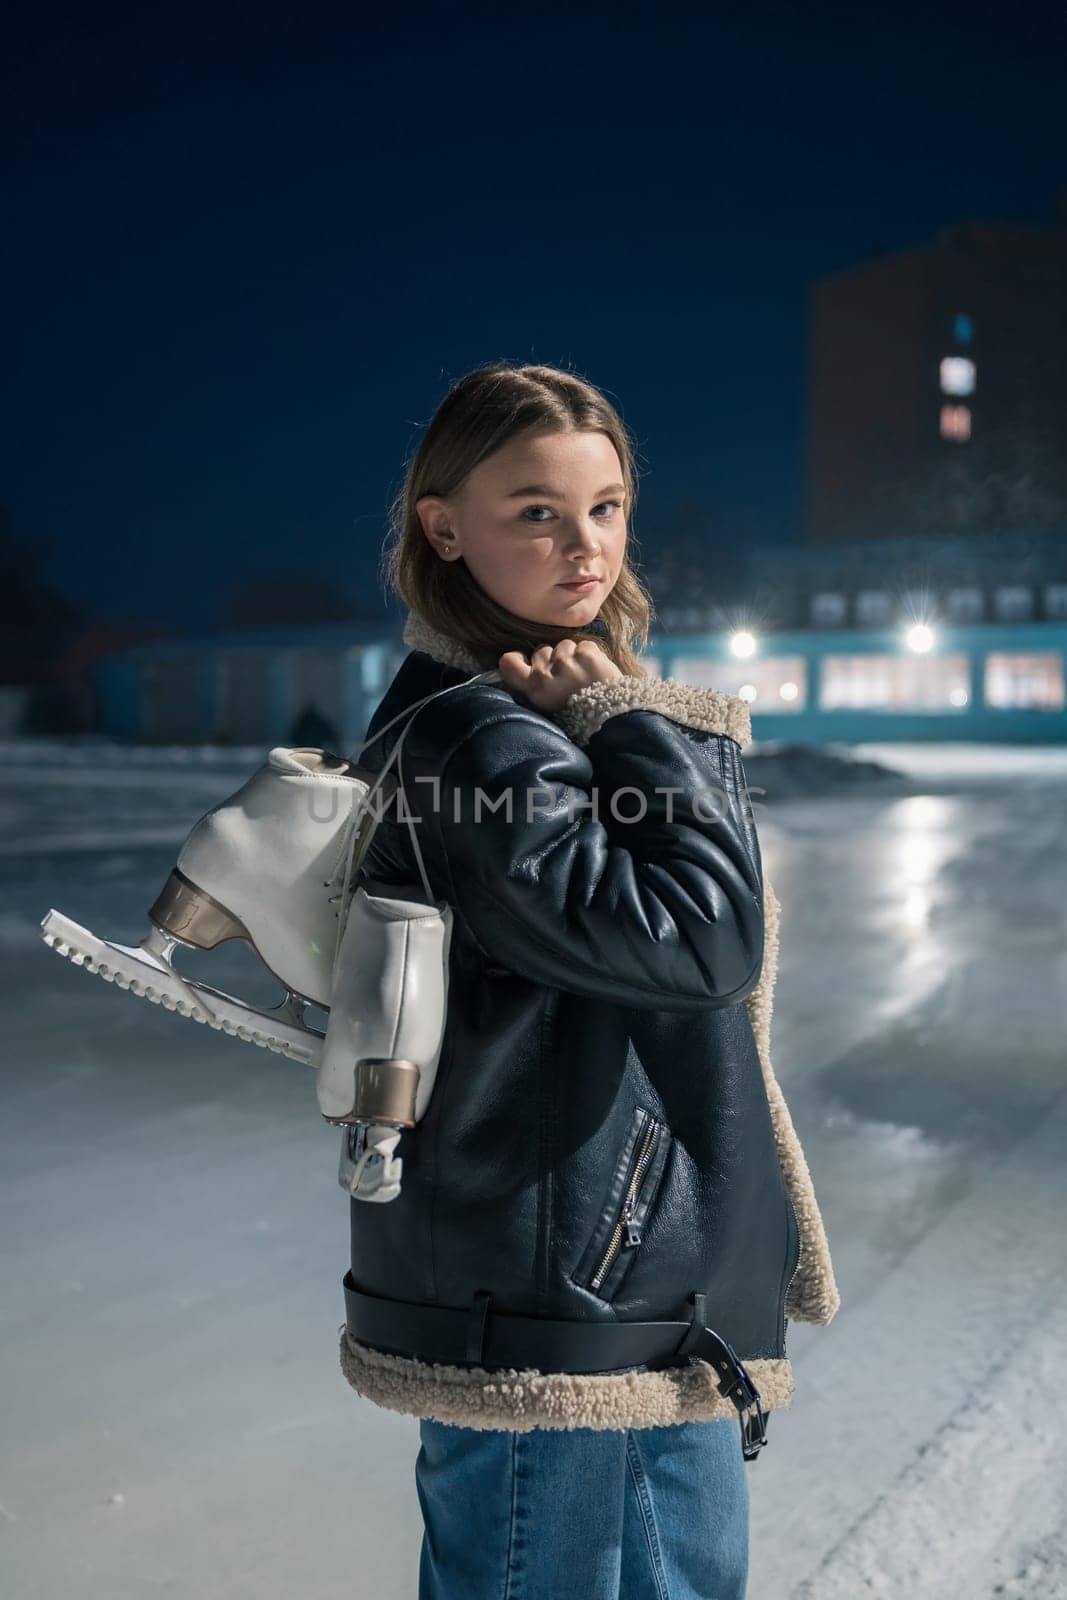 Beautiful young woman is ready for ice skating. Winter activities concept